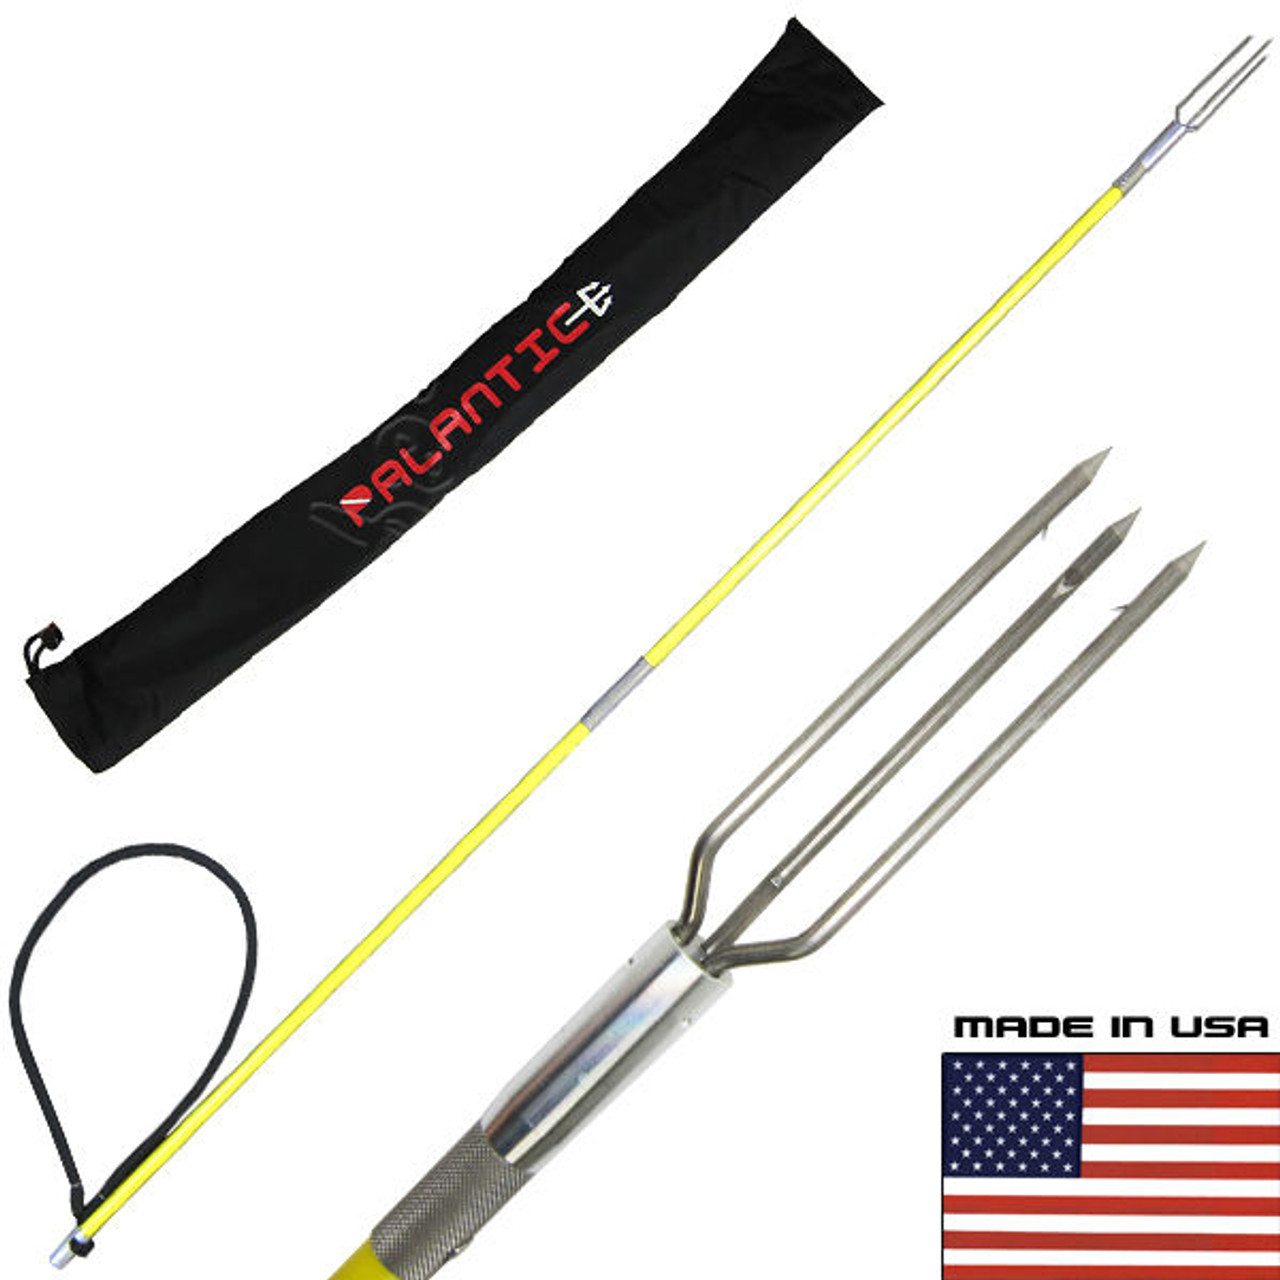 4.5' Travel Two Piece Spearfishing Fiber Glass Pole Spear w/ Lionfish Tip &  Bag